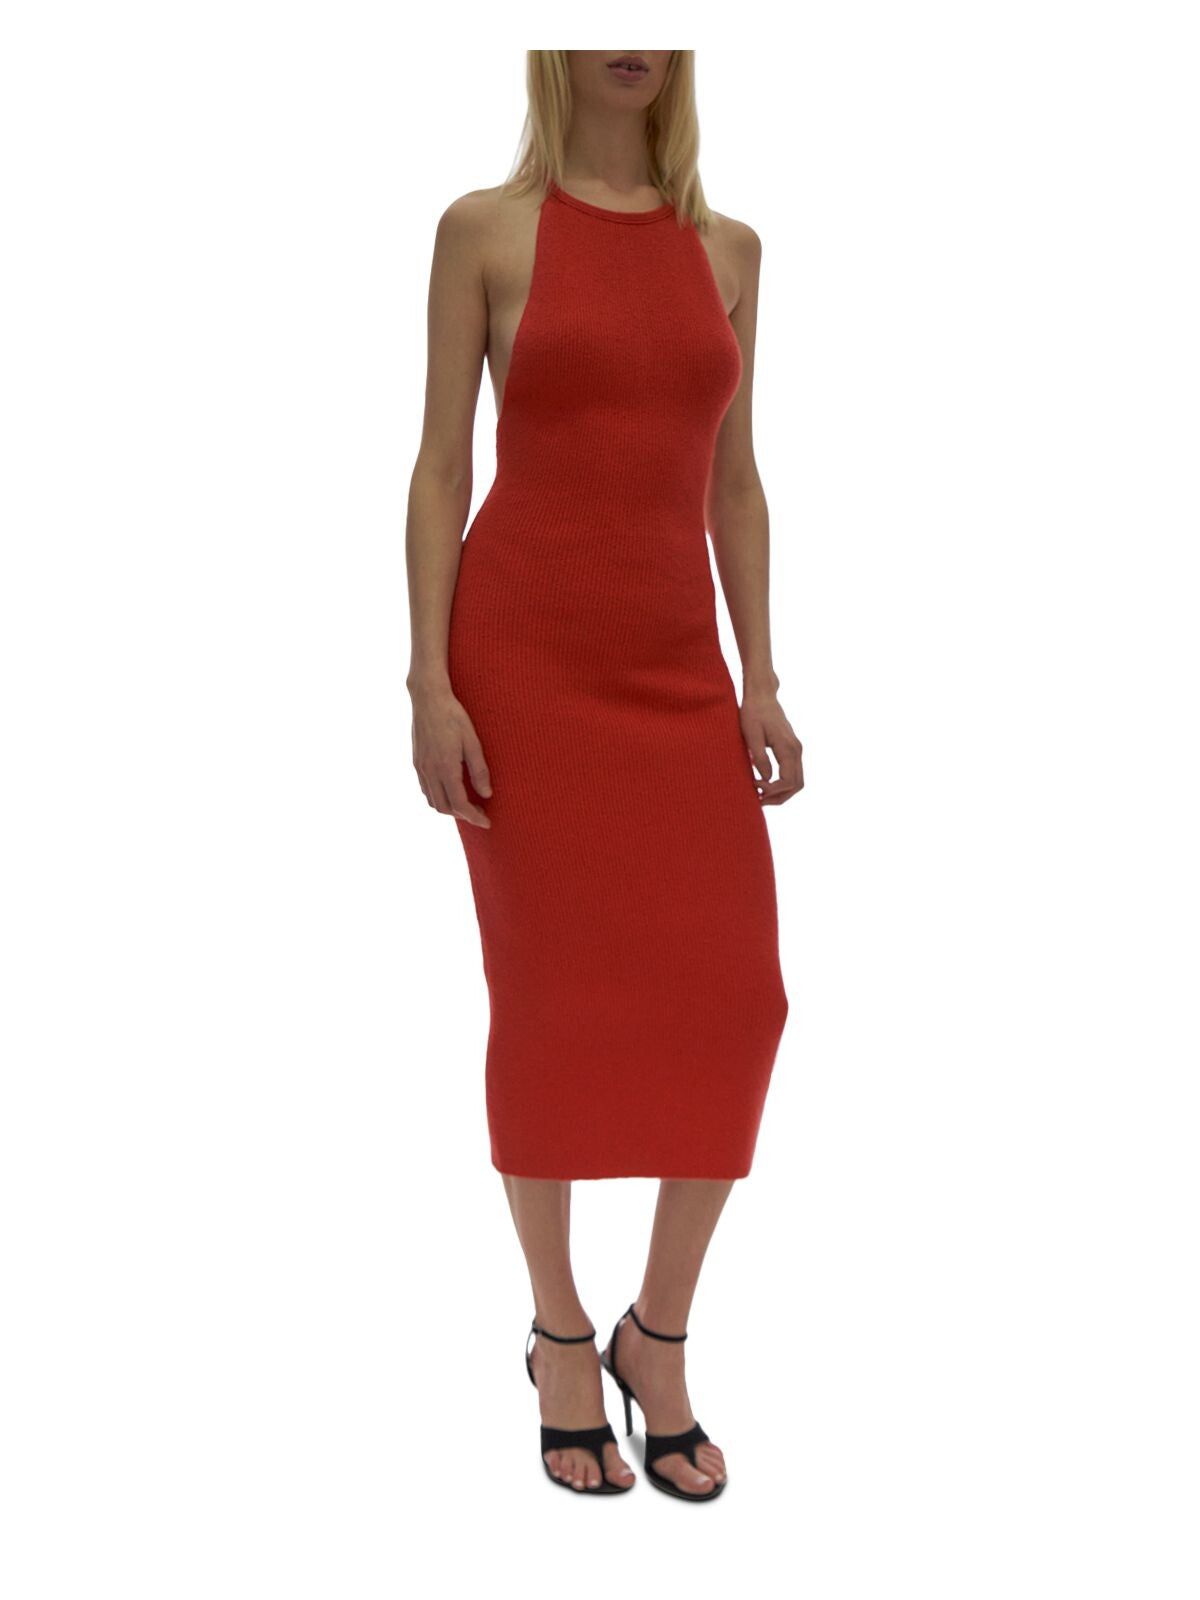 HELMUT LANG Womens Coral Knit Ribbed Beaded Y Back Sleeveless Round Neck Below The Knee Cocktail Body Con Dress M